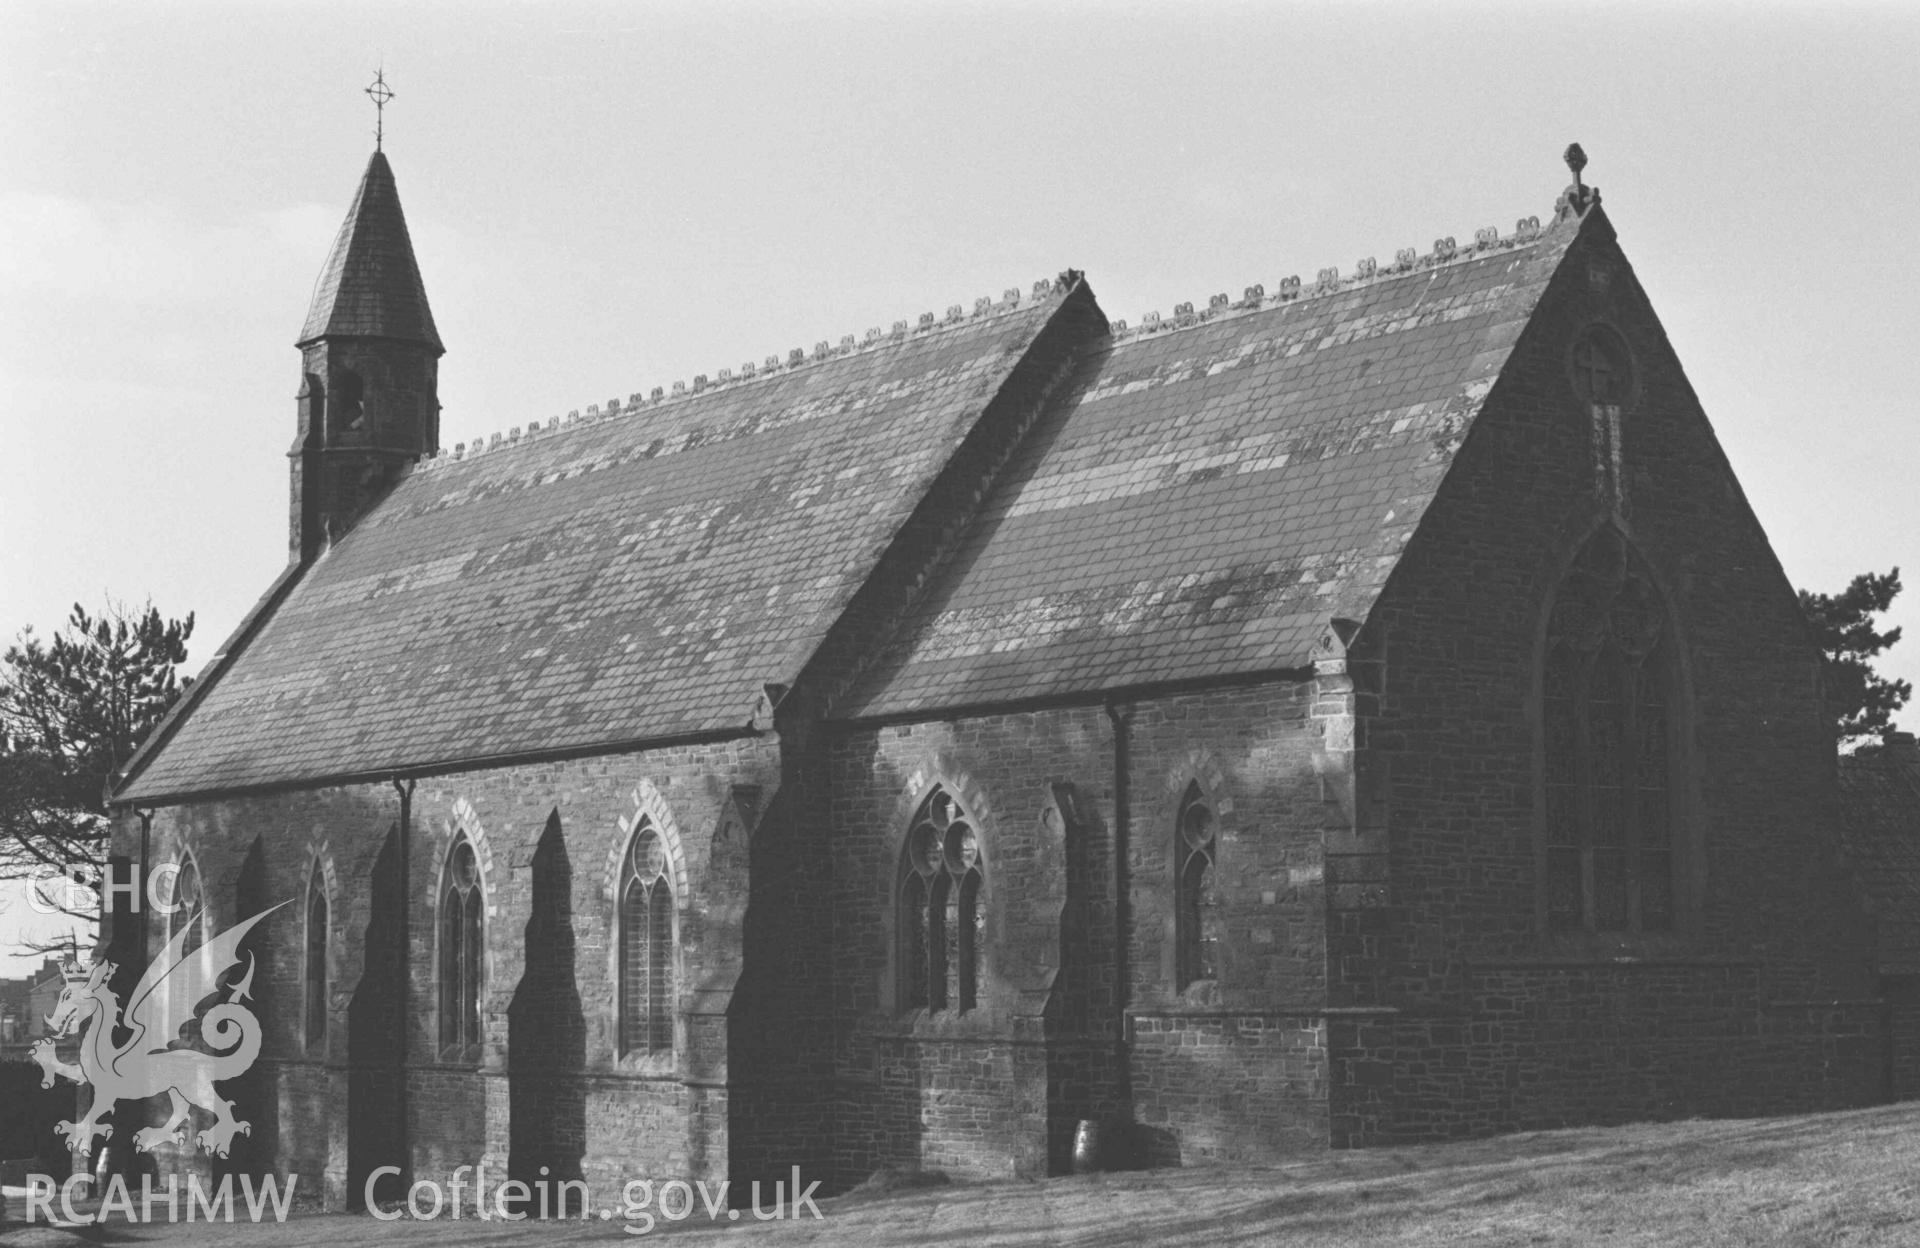 Digital copy of a black and white negative showing St Matthew's Parish Church, Borth. Photographed by Arthur Chater on 2 January 1969. Looking north west from Grid Reference SN 6122 8974.